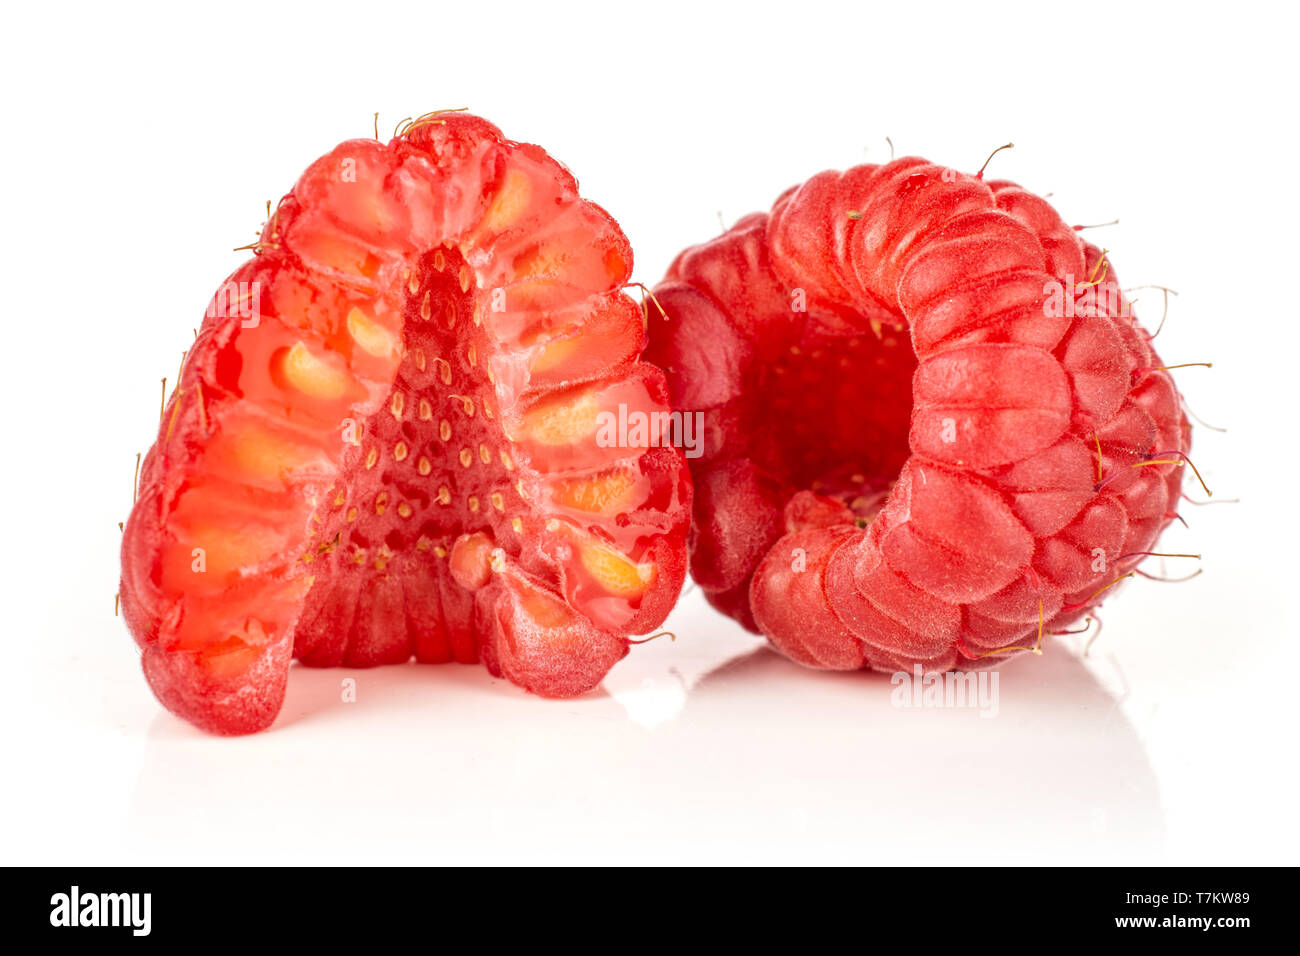 Group of one whole one half of fresh red raspberry cross section isolated on white background Stock Photo